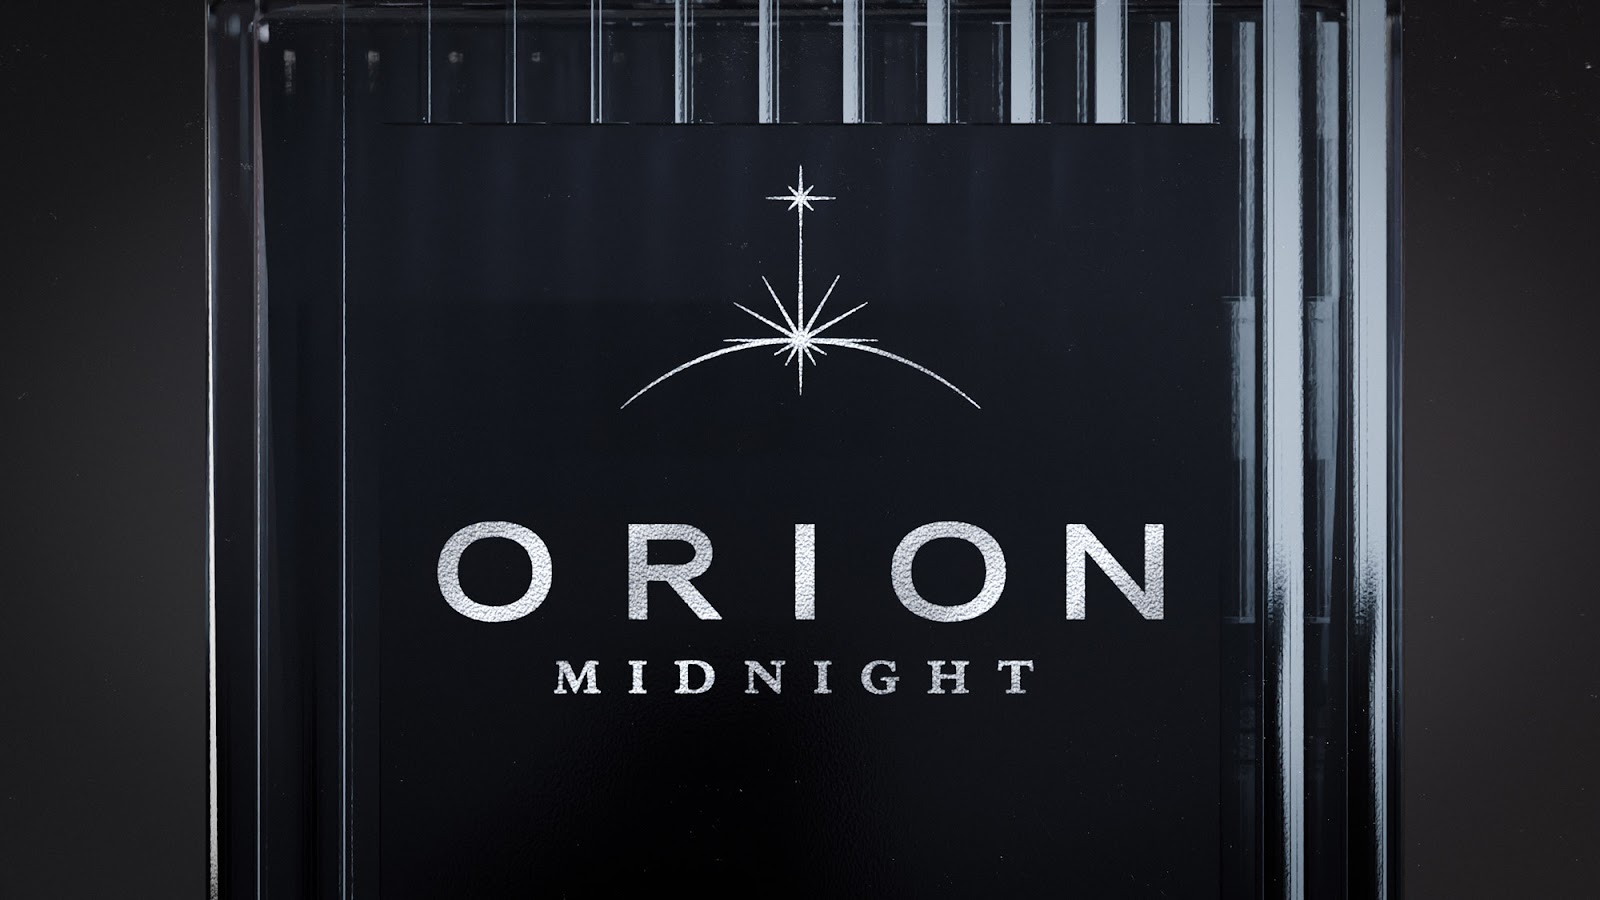 Branding and packaging design artifacts for Orion Midnight product designed by Studio Alpeto